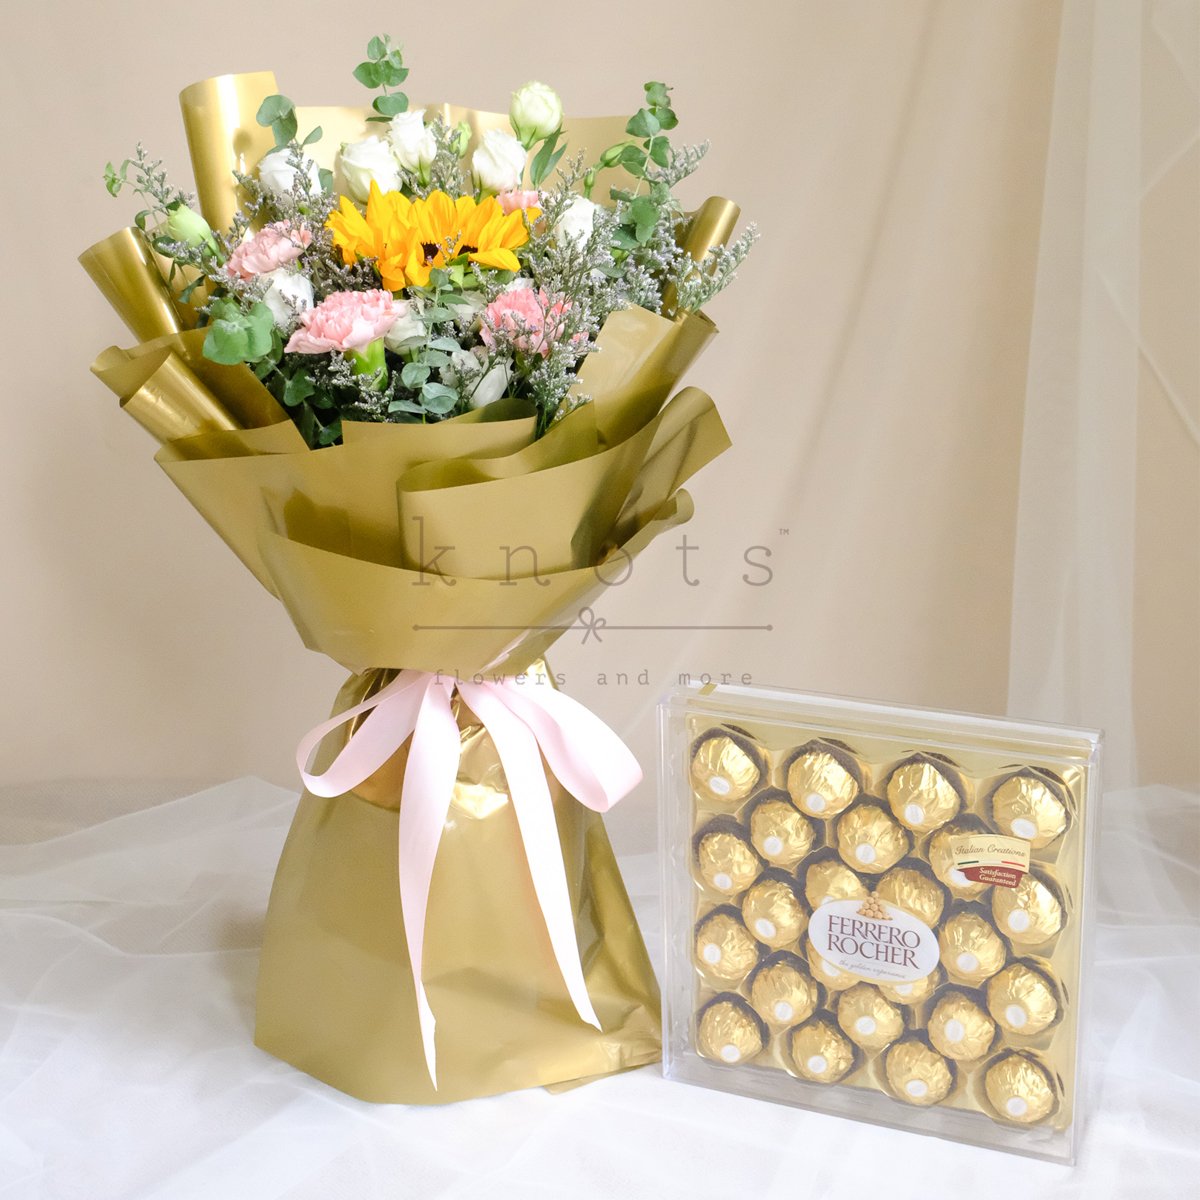  For You, with Love (Sunflower Bouquet w/ Ferrero Chocolates)